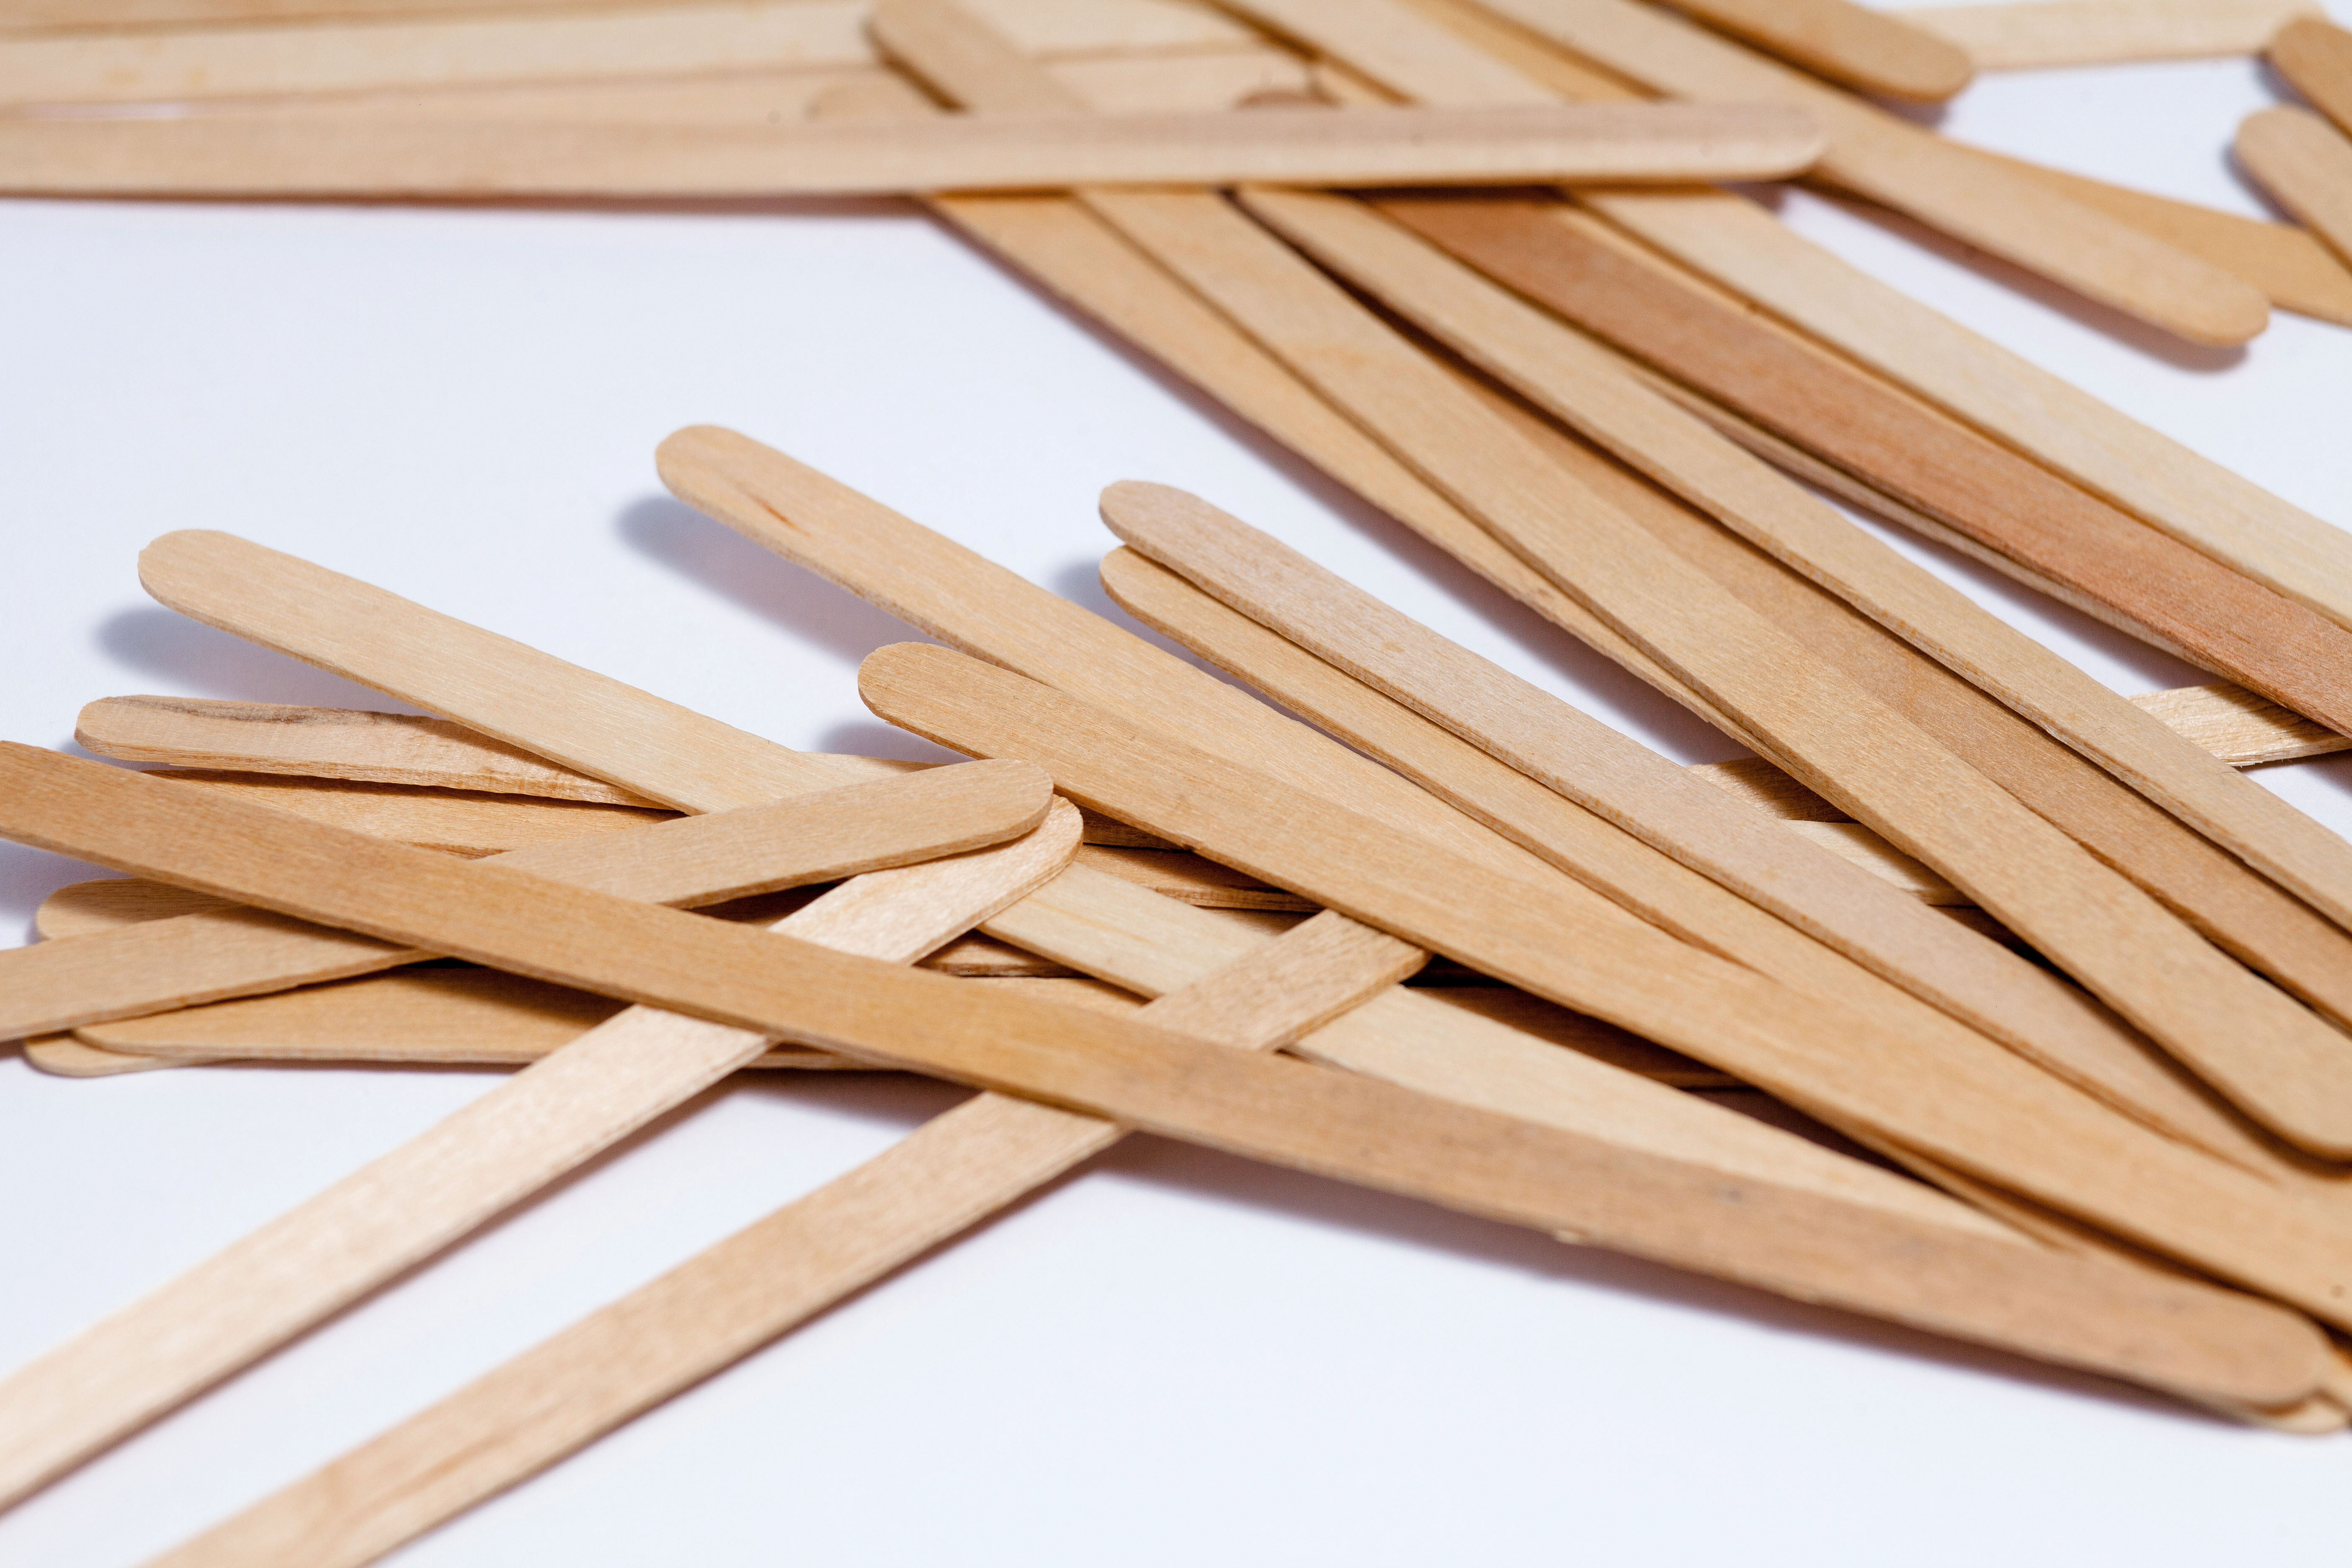 7 1/2" Coffee Stirrers With Round Ends Case of 10 boxes/1,000ct = 10,000ct (Item# FS204)